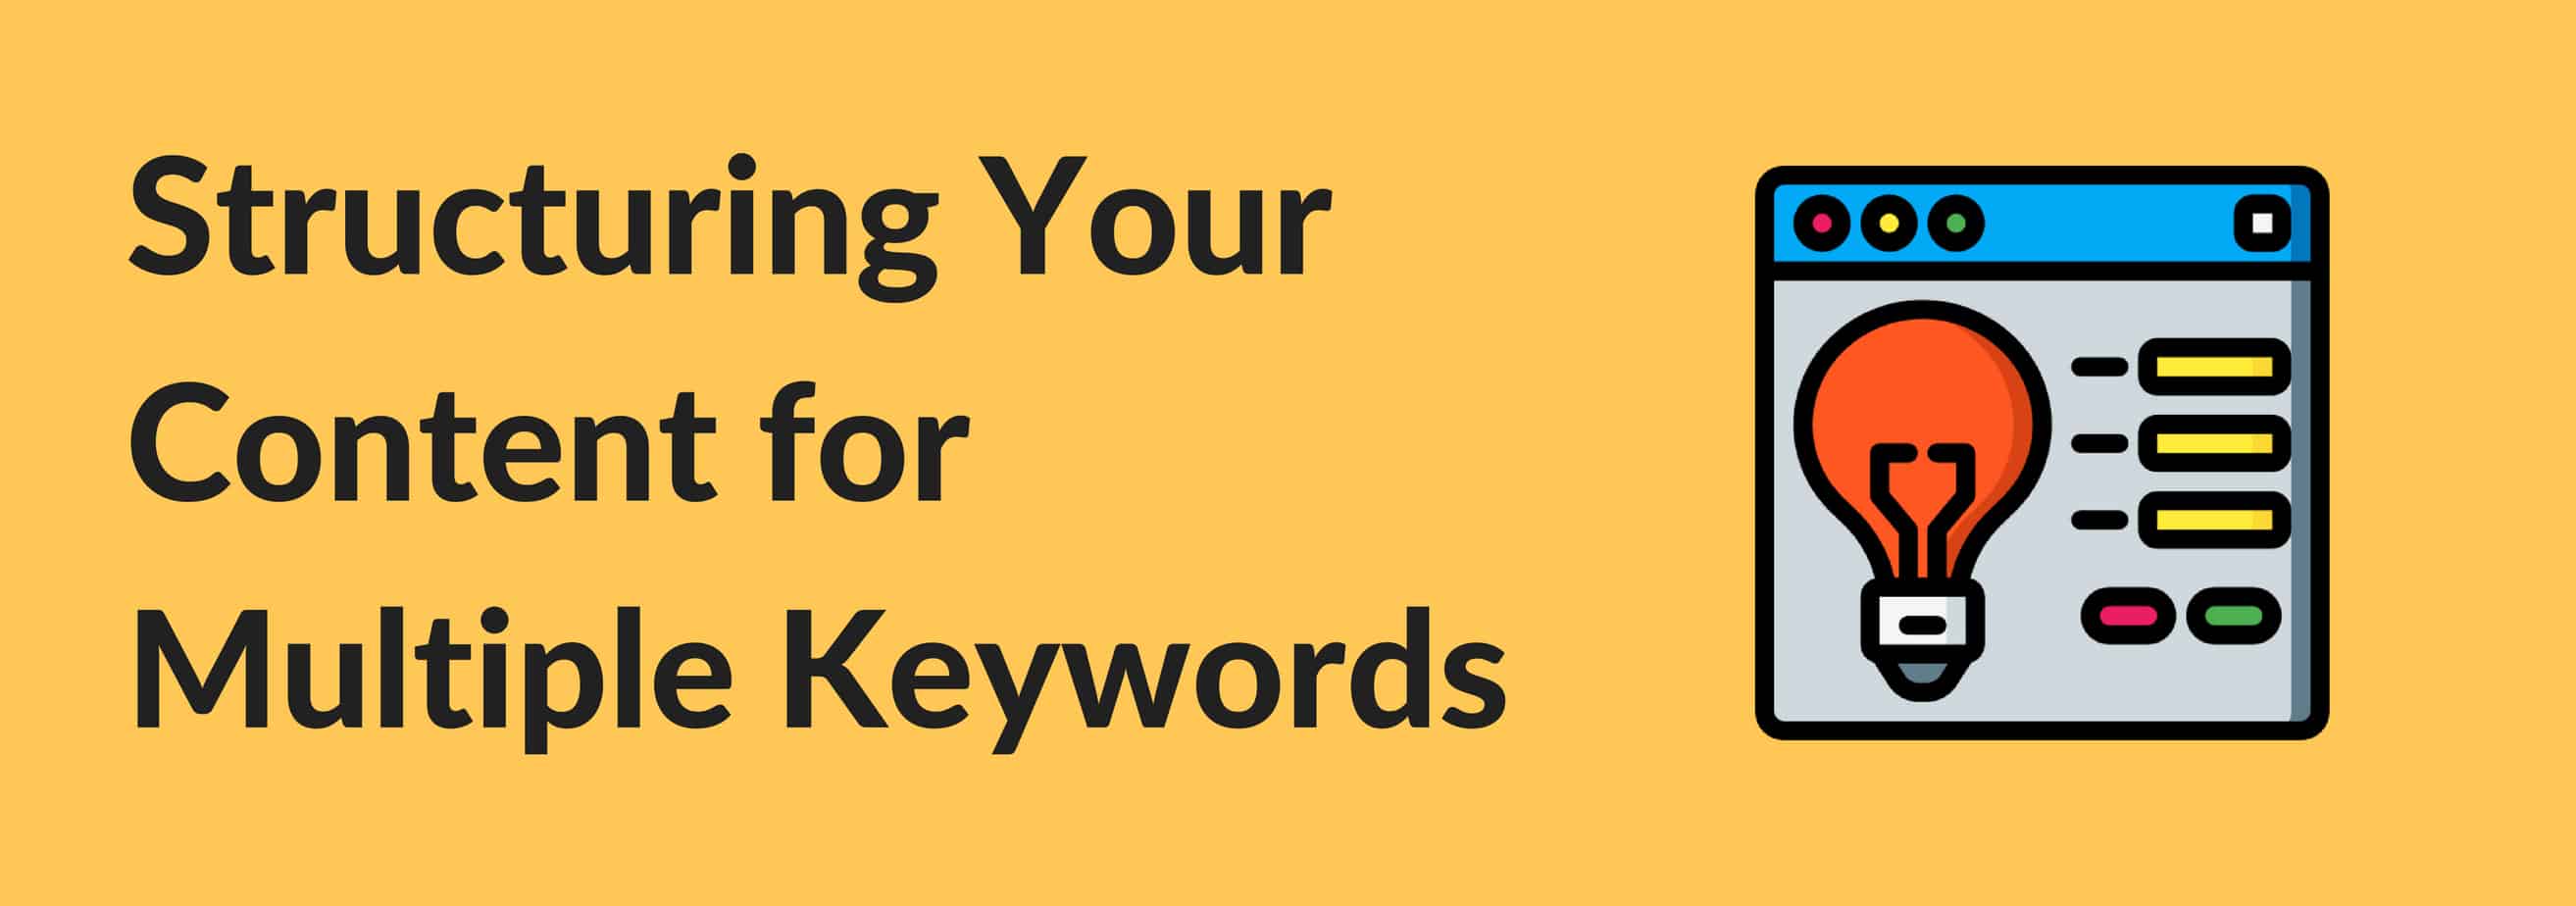 Structuring Your Content for Multiple Keywords